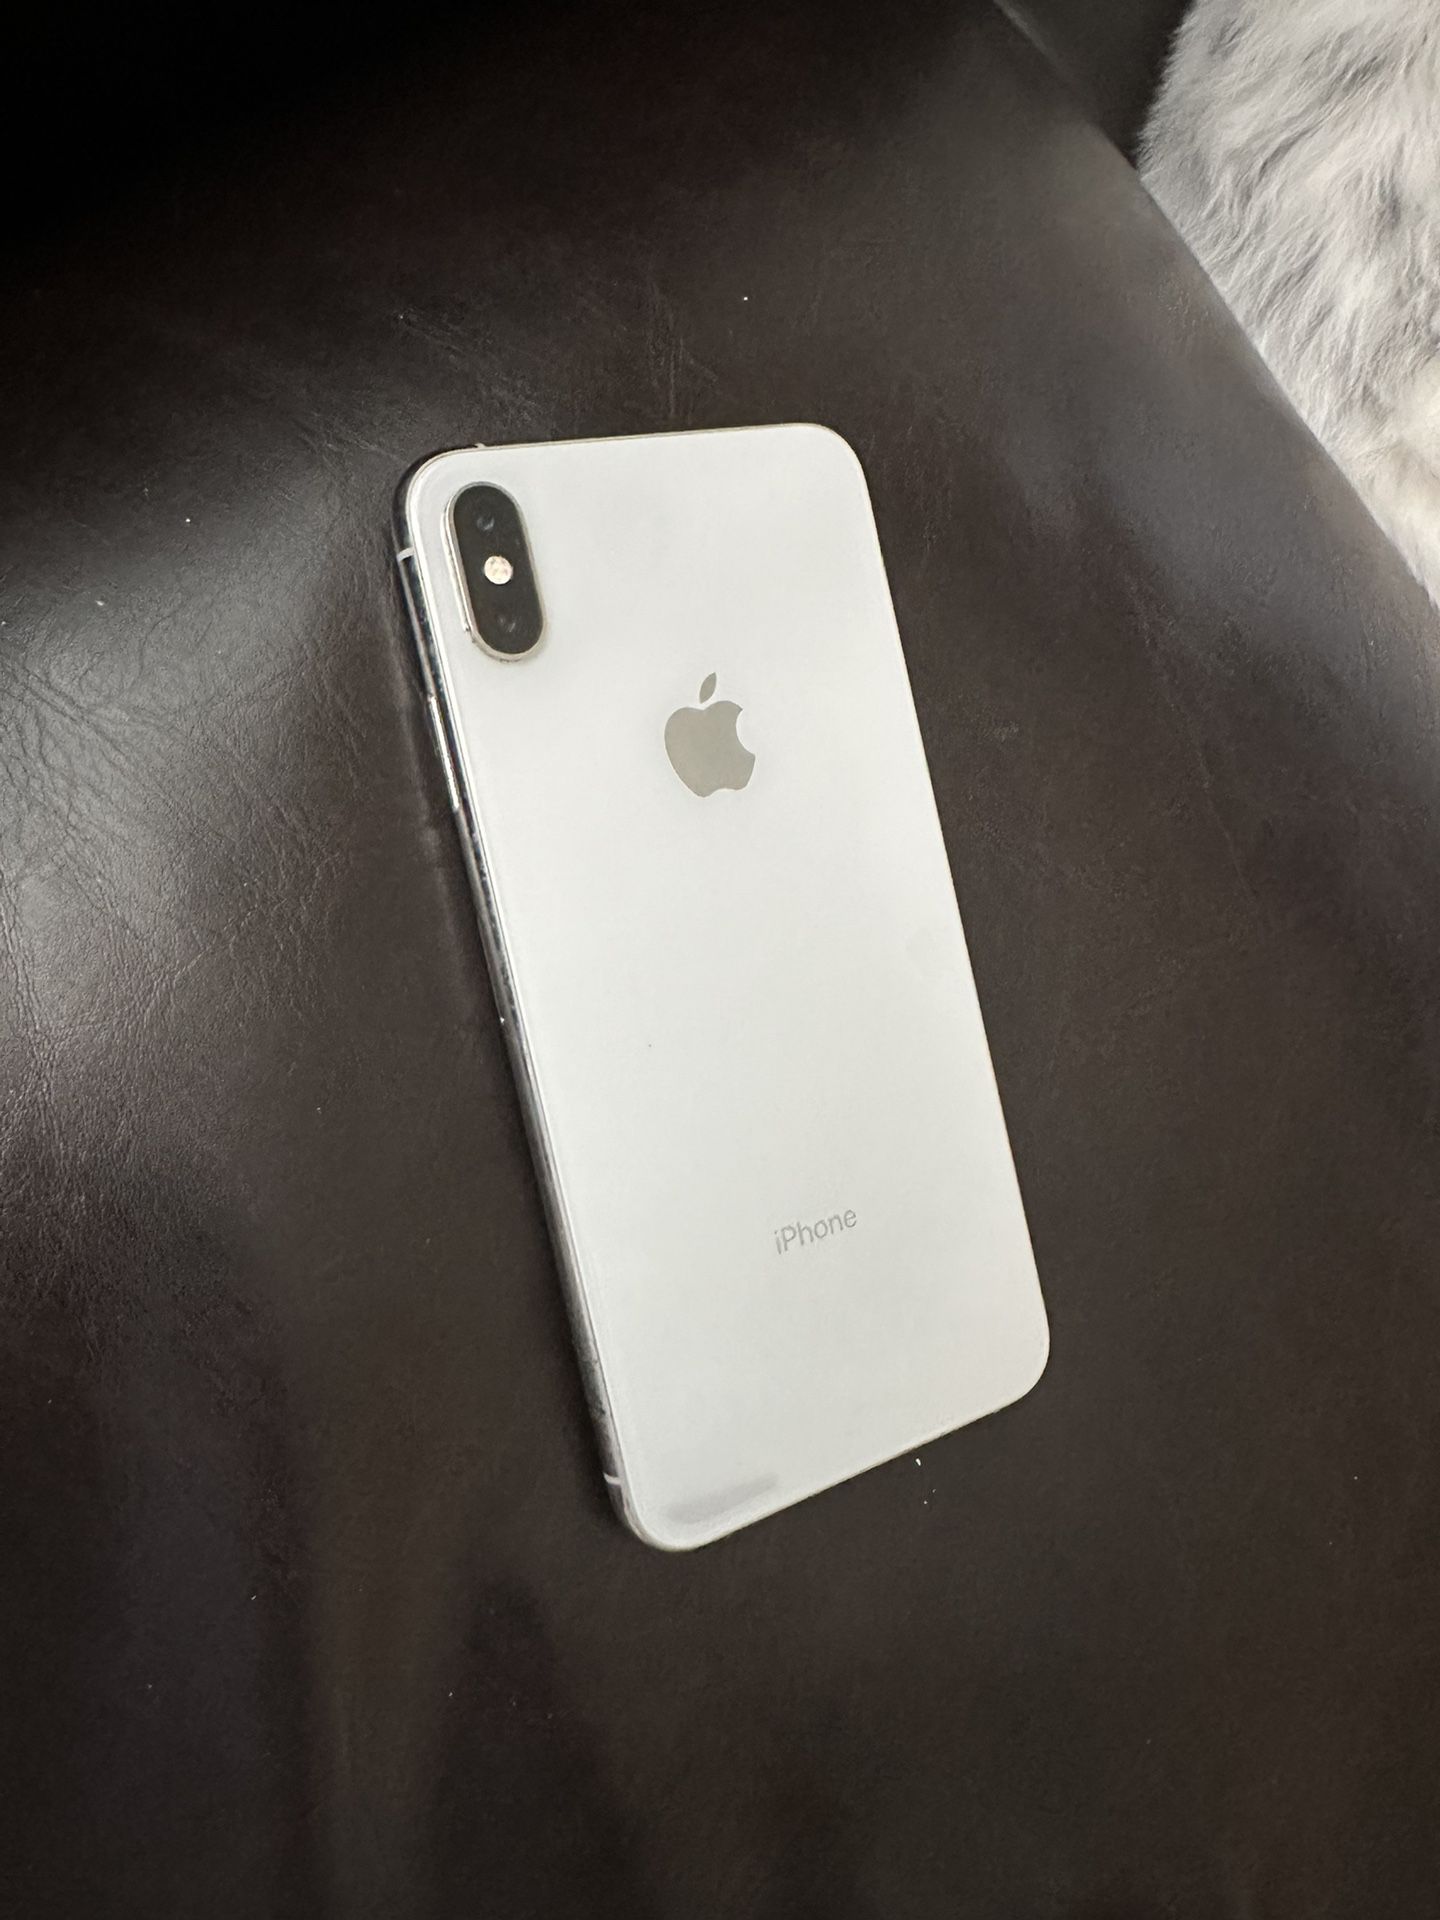 iPhone X Max Plus Unlocked - Works With All Phone carriers.